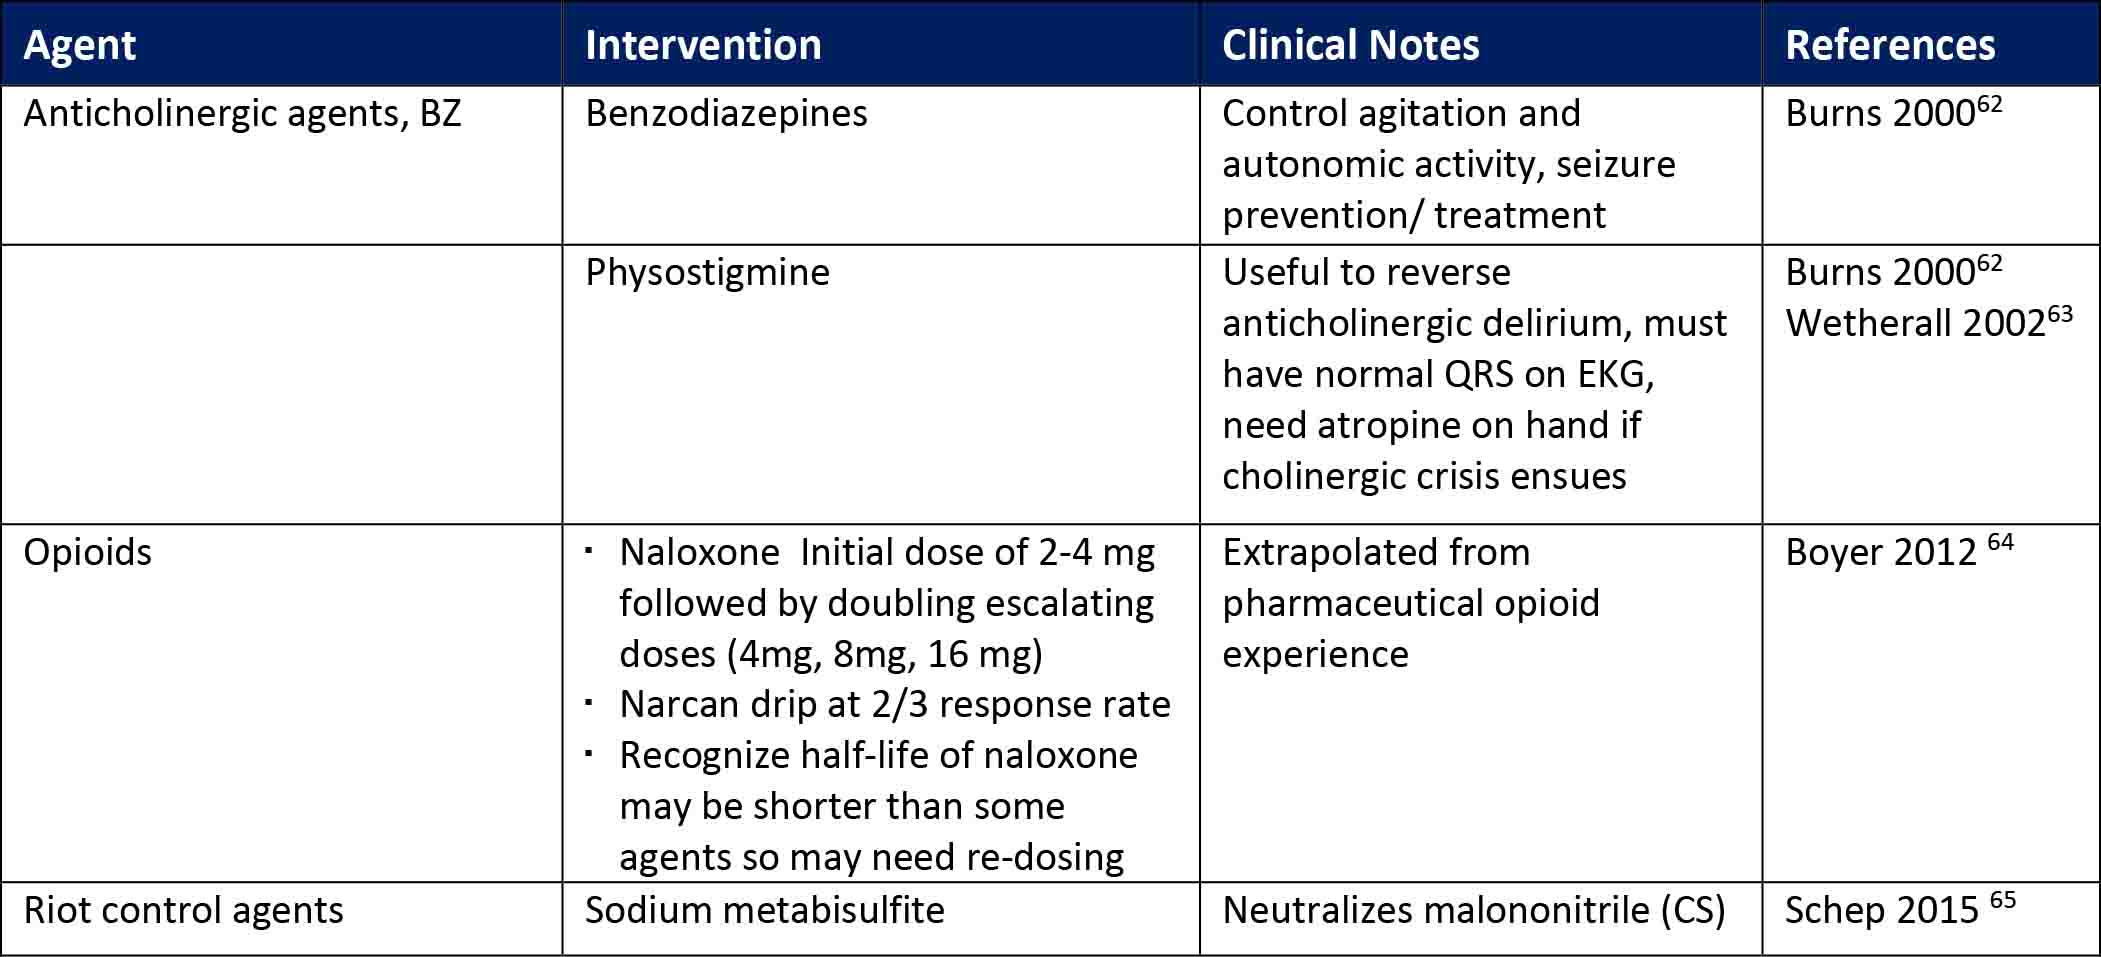 Interventions for Incapacitating Agents